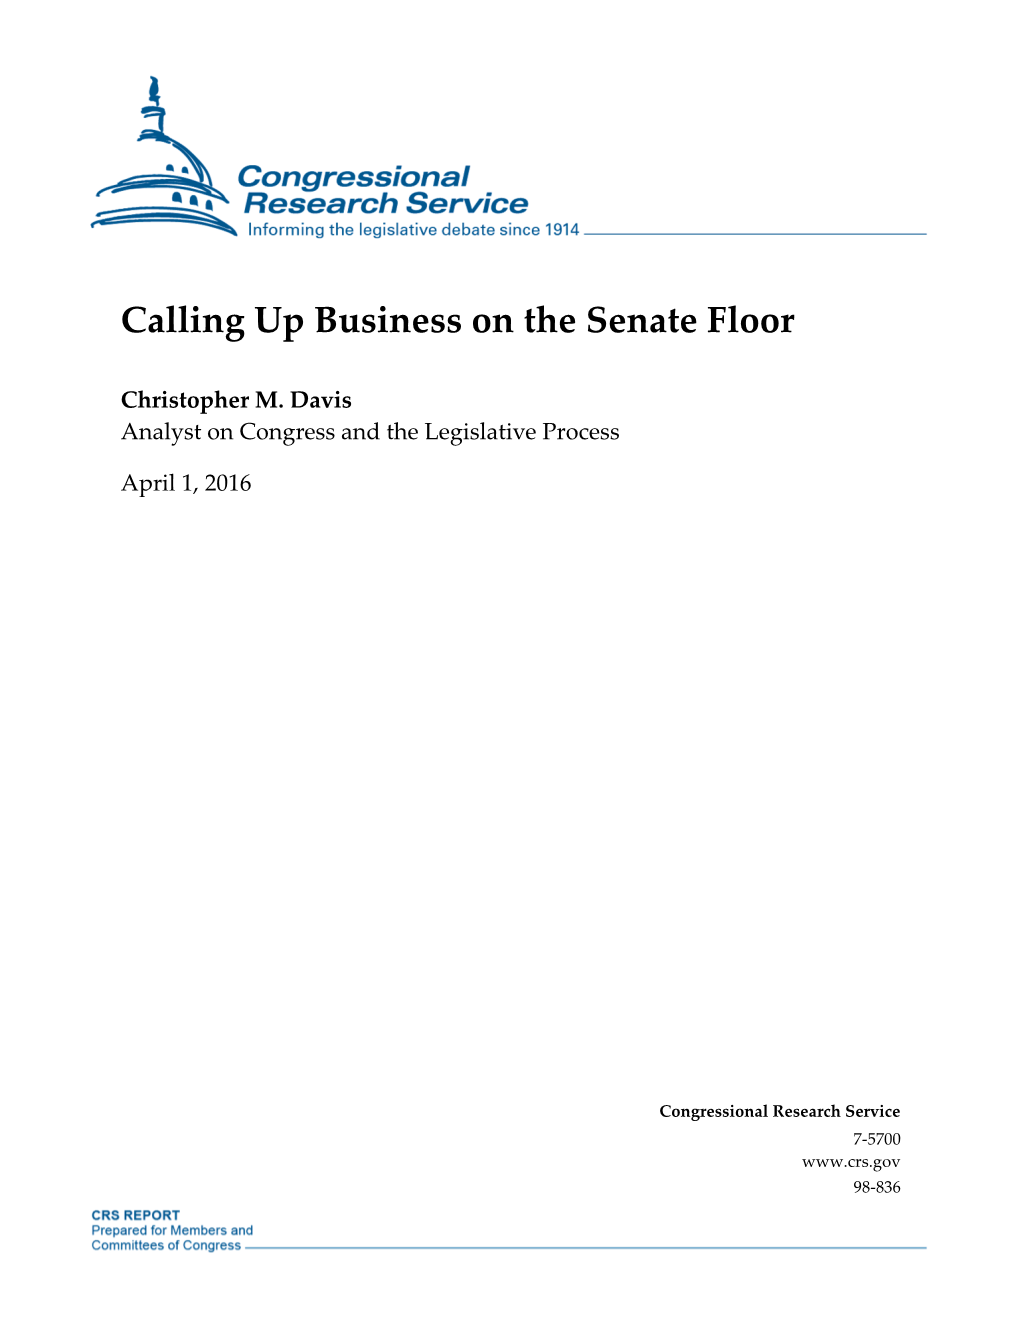 Calling up Business on the Senate Floor